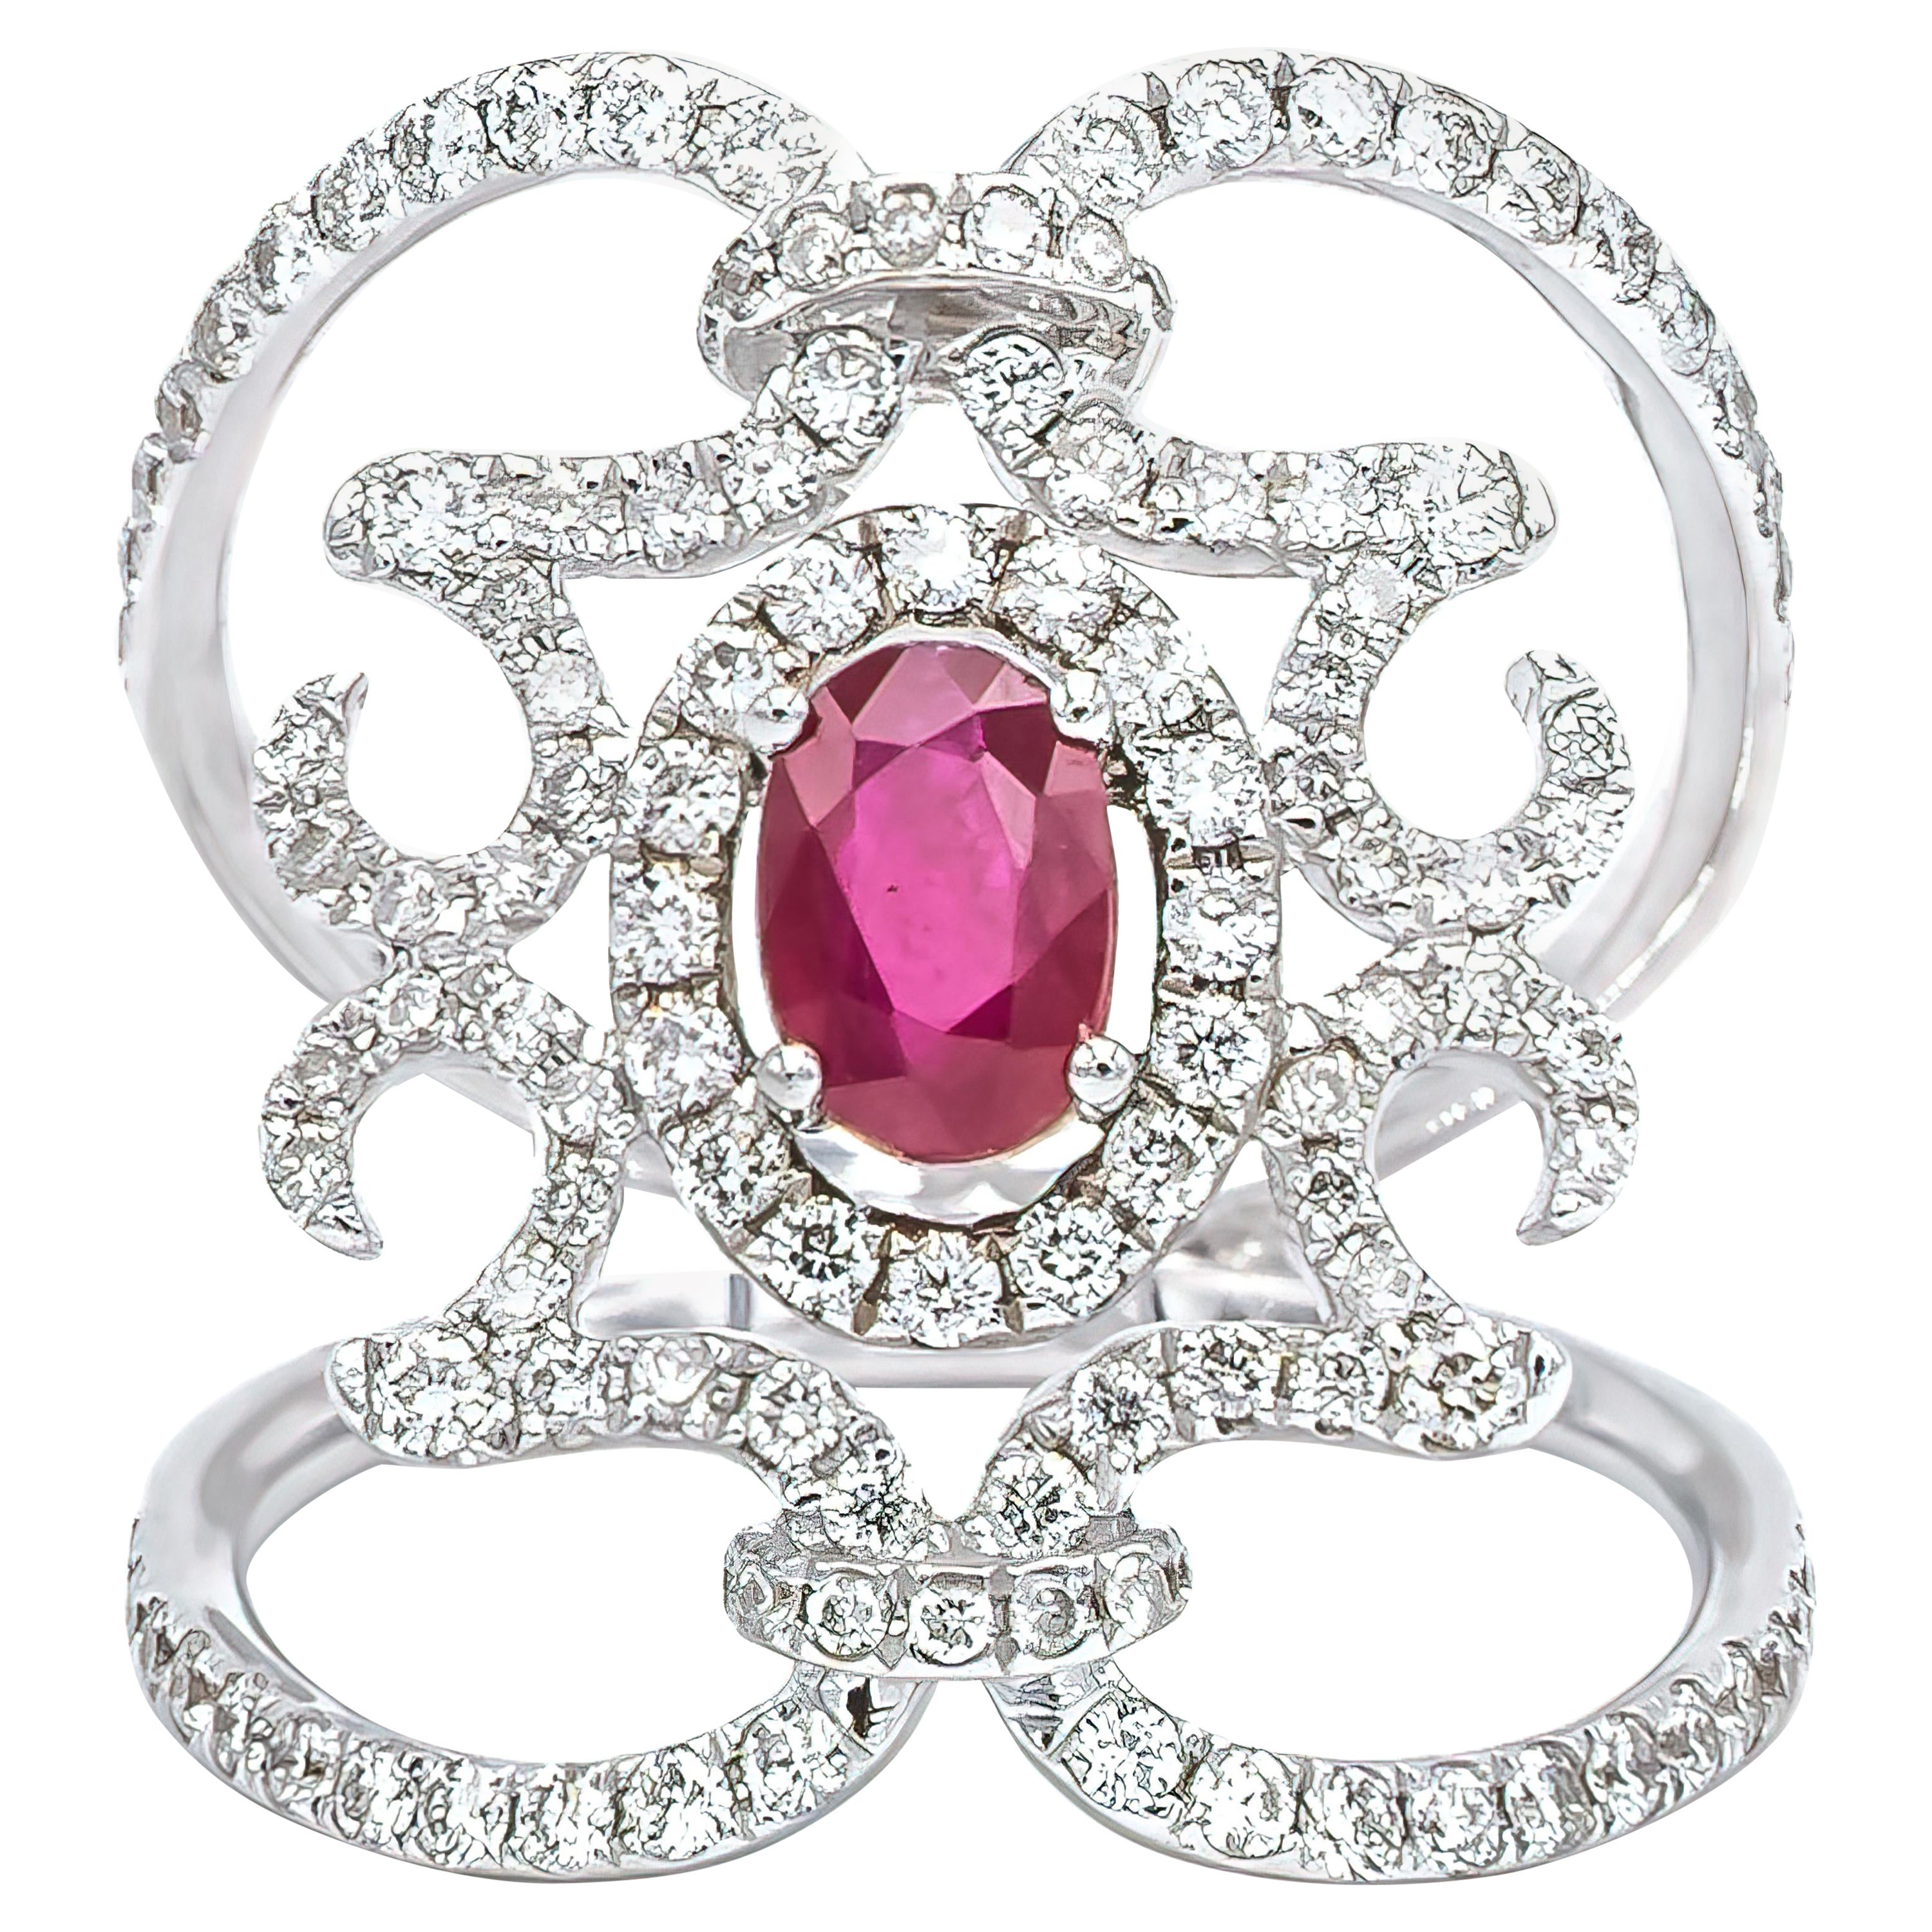 Oval Shaped Ruby Set in an Antique Style Curved Gold Band Cocktail Ring For Sale